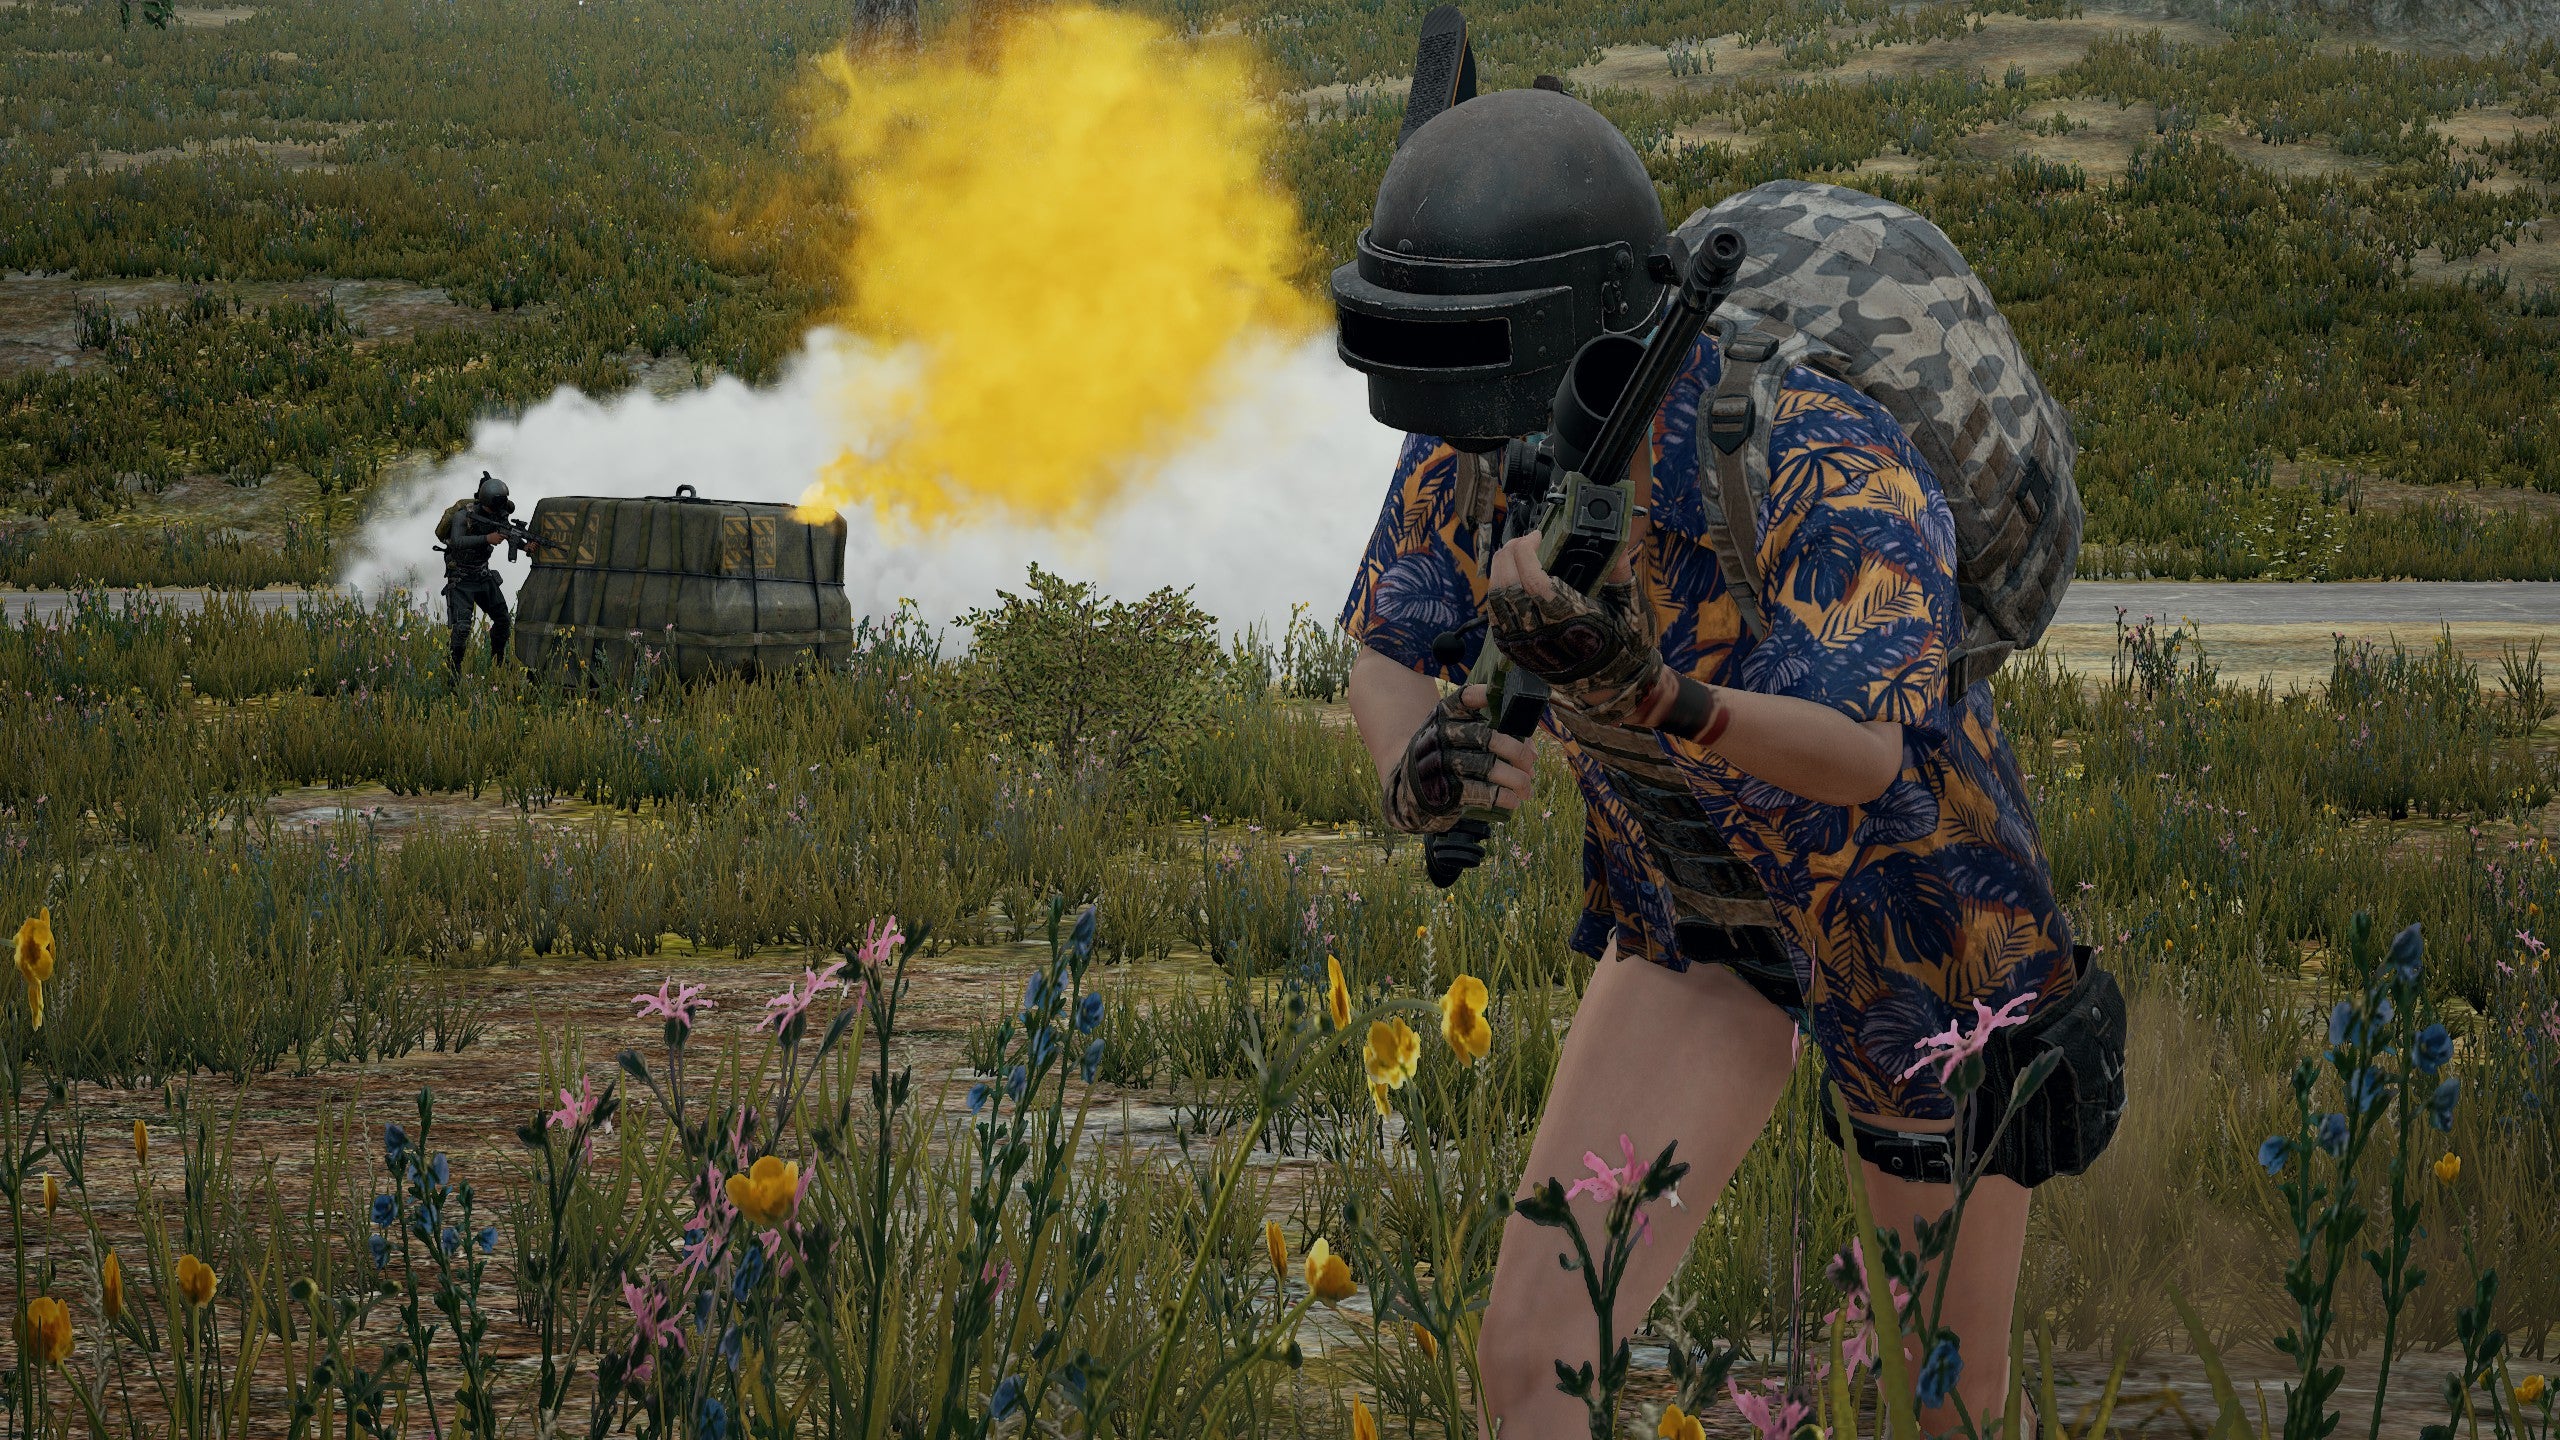 A huge care package in a Playerunknown's Battlegrounds screenshot.